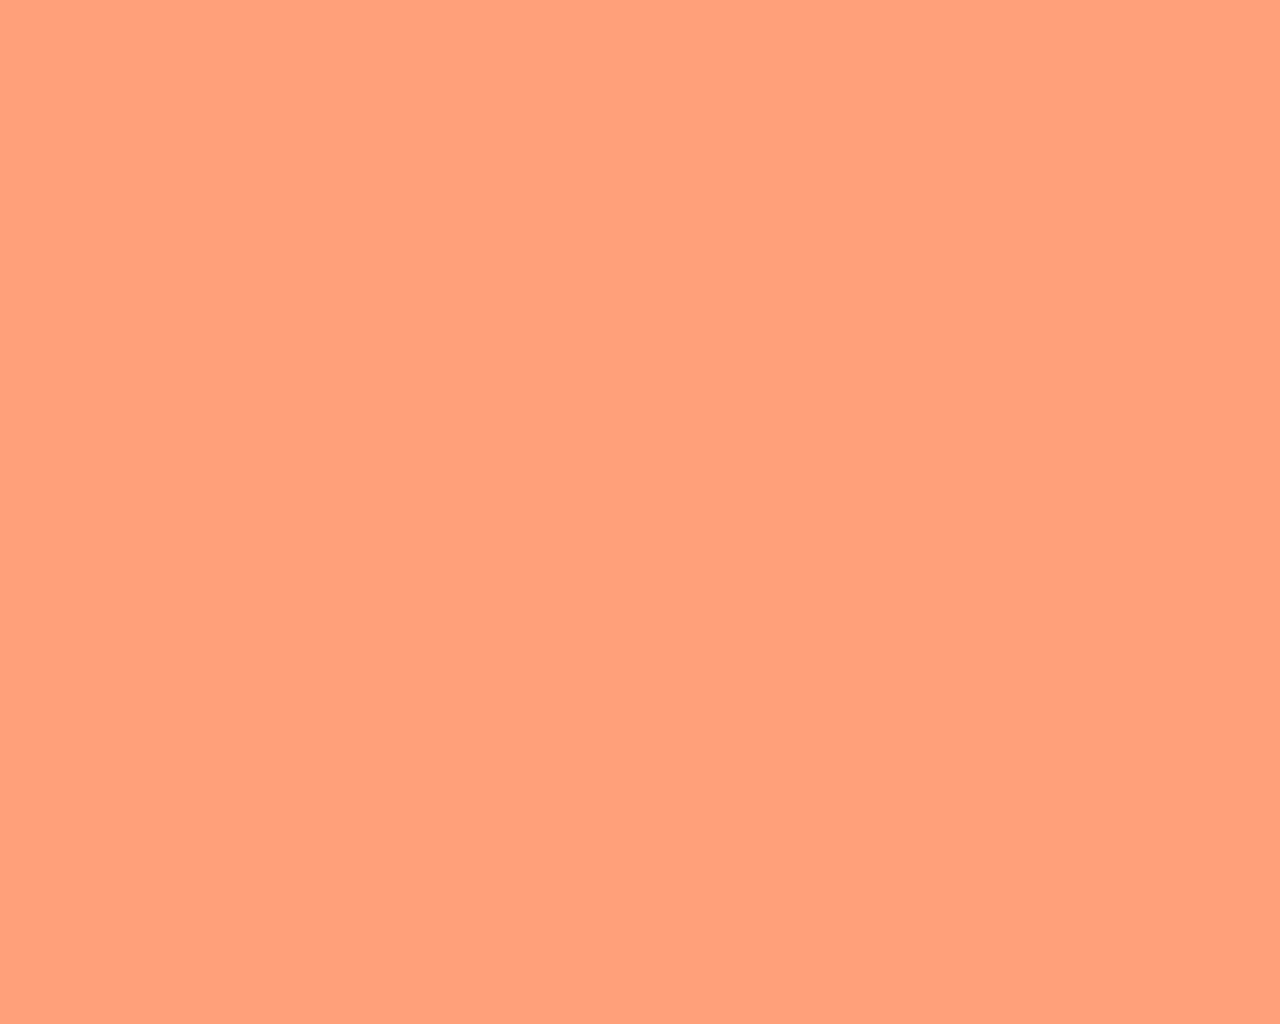 1280x1024 Light Salmon Solid Color Background